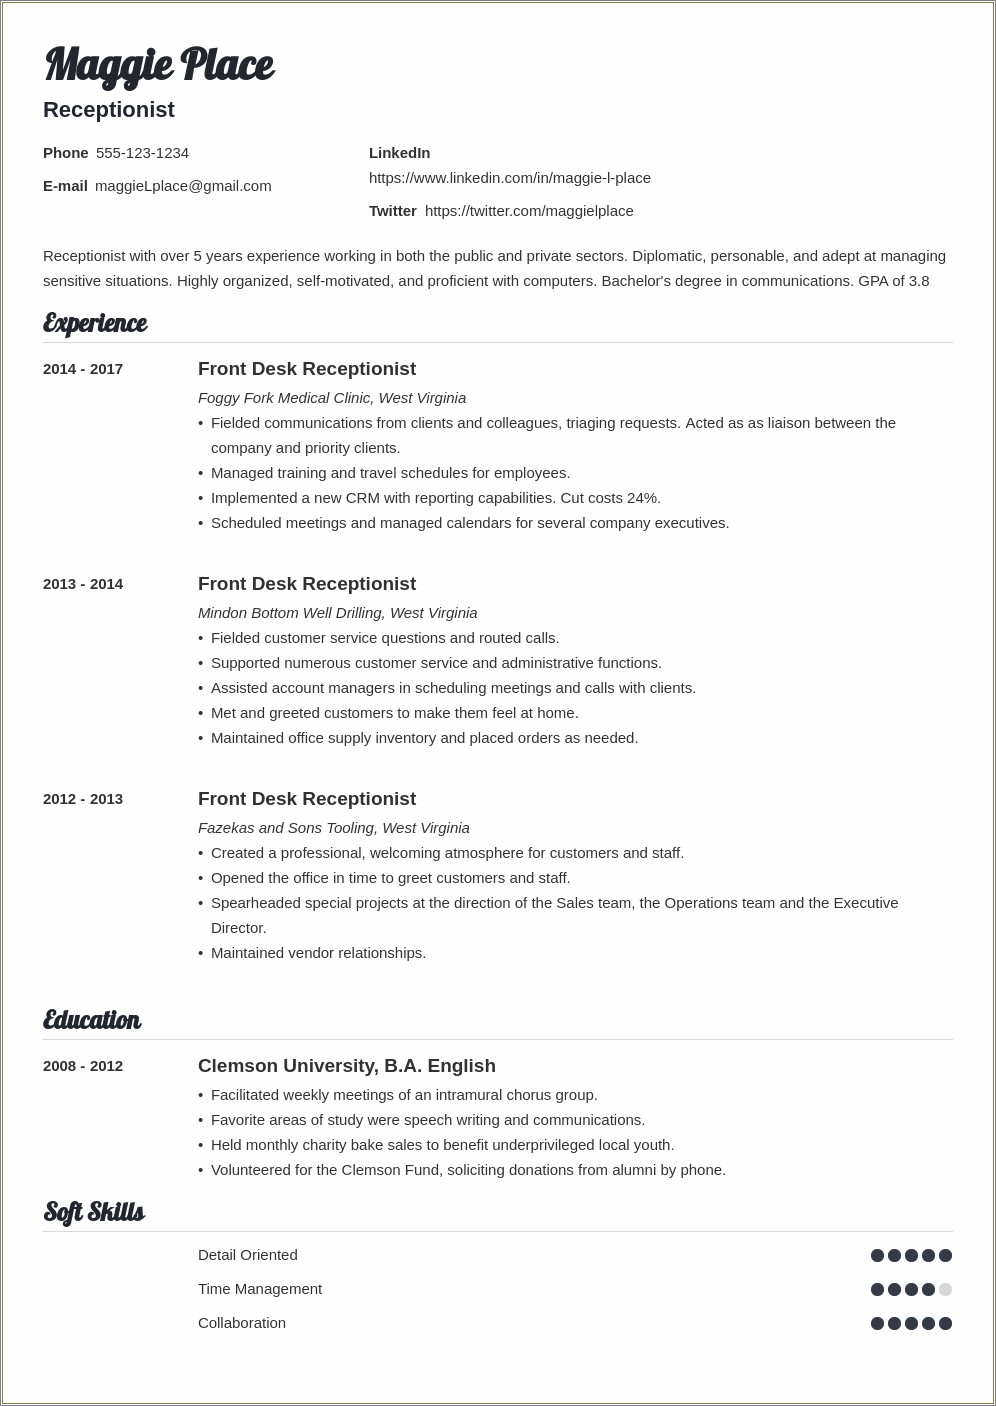 Resume Examples For Receptionists And Dietary